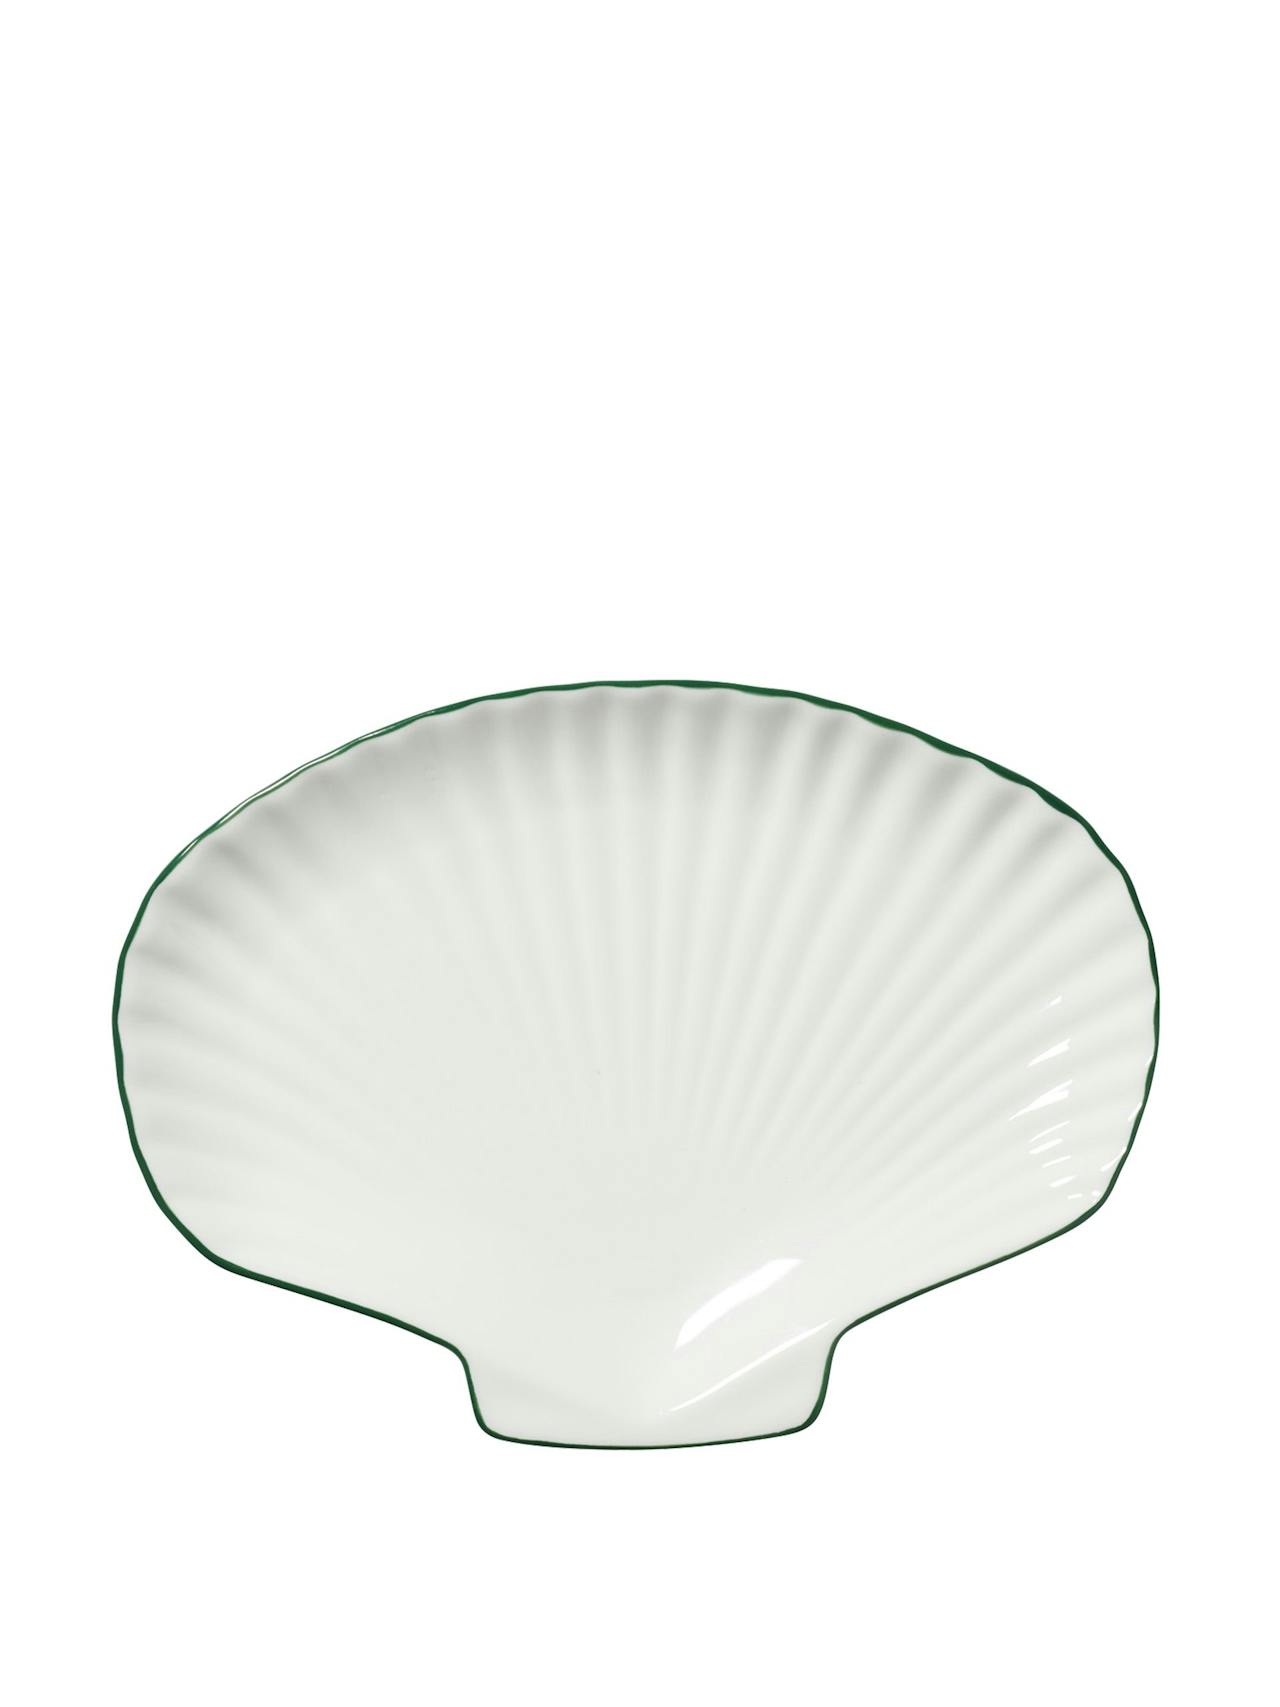 Shell plate with green edge